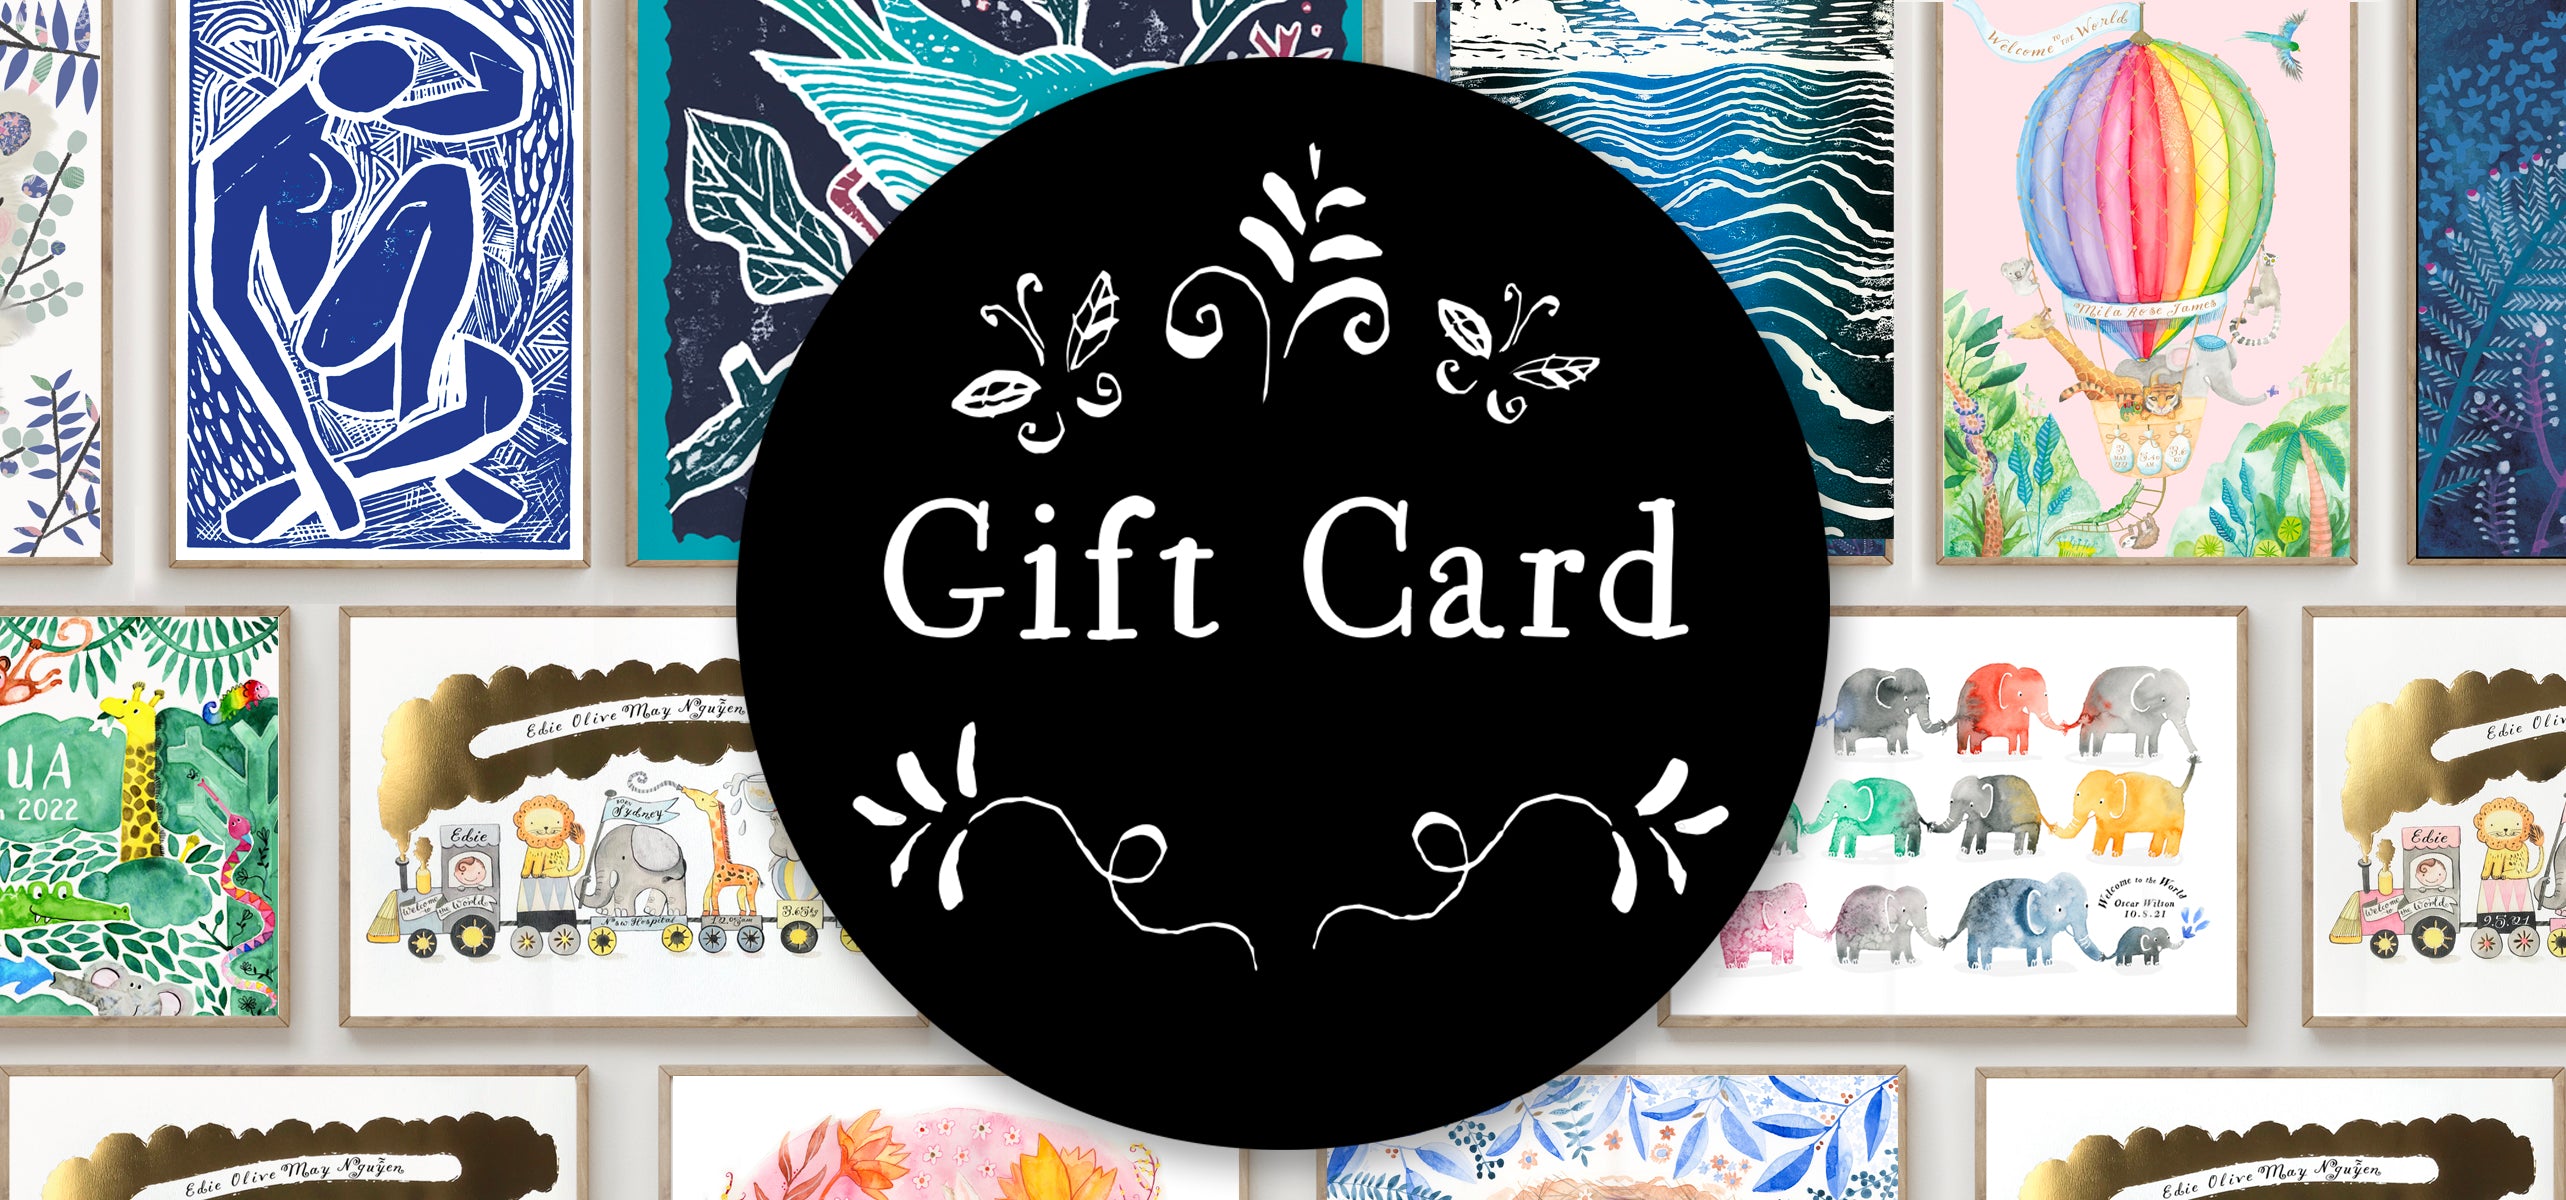 Bianca Moore Studio Gift Voucher. Let friends and family choose their own art and products to suit their style or occasion.